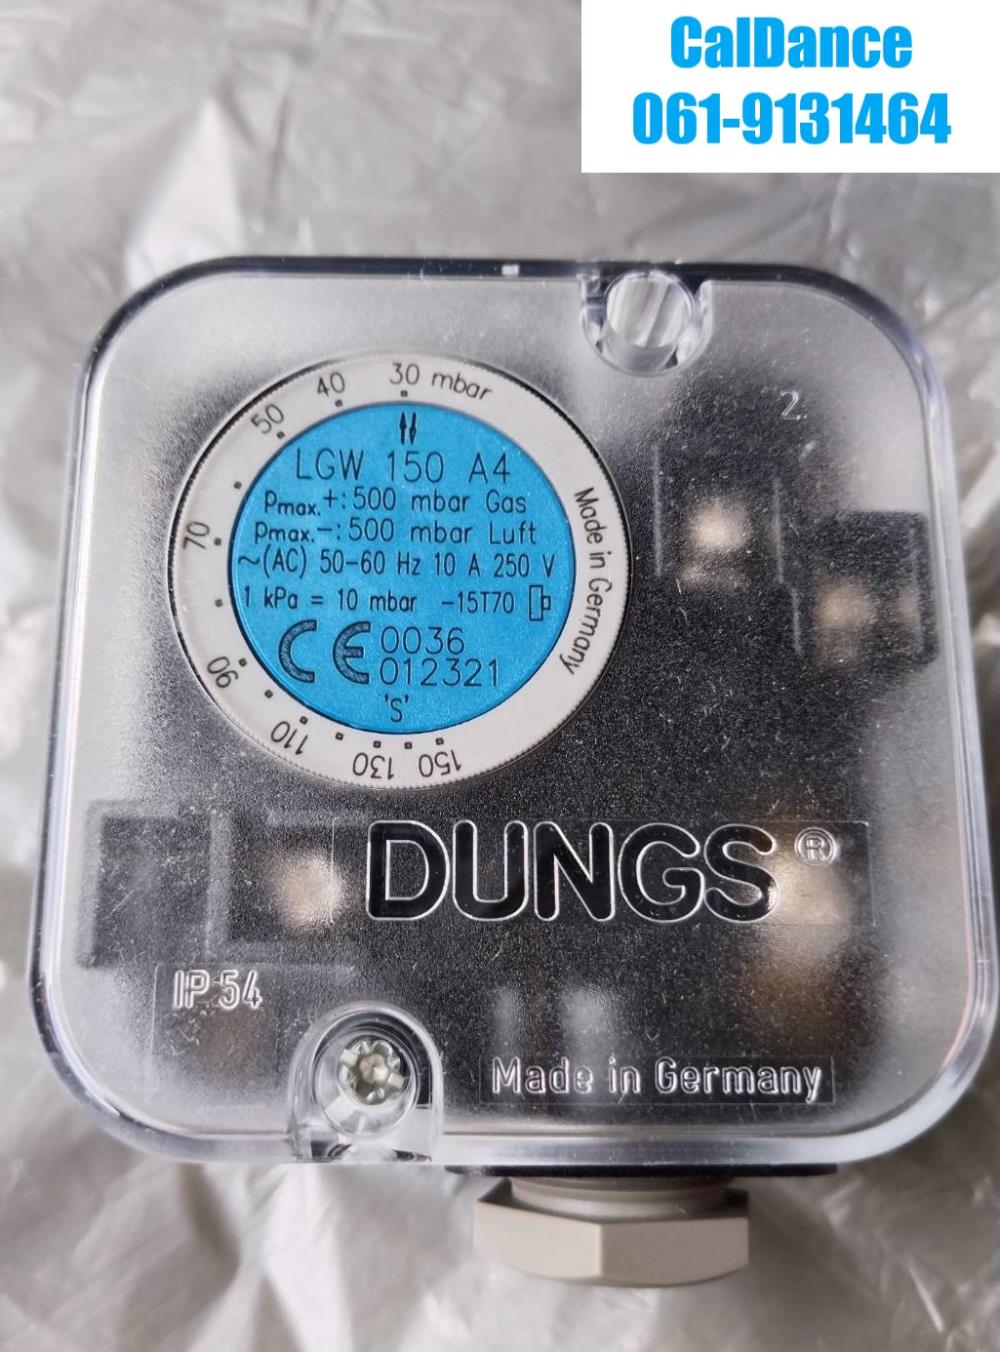 "DUNGS" Pressure Switch LGW 150 A4,"DUNGS" Pressure Switch LGW 150 A4,"DUNGS" Pressure Switch LGW 150 A4,Instruments and Controls/Switches